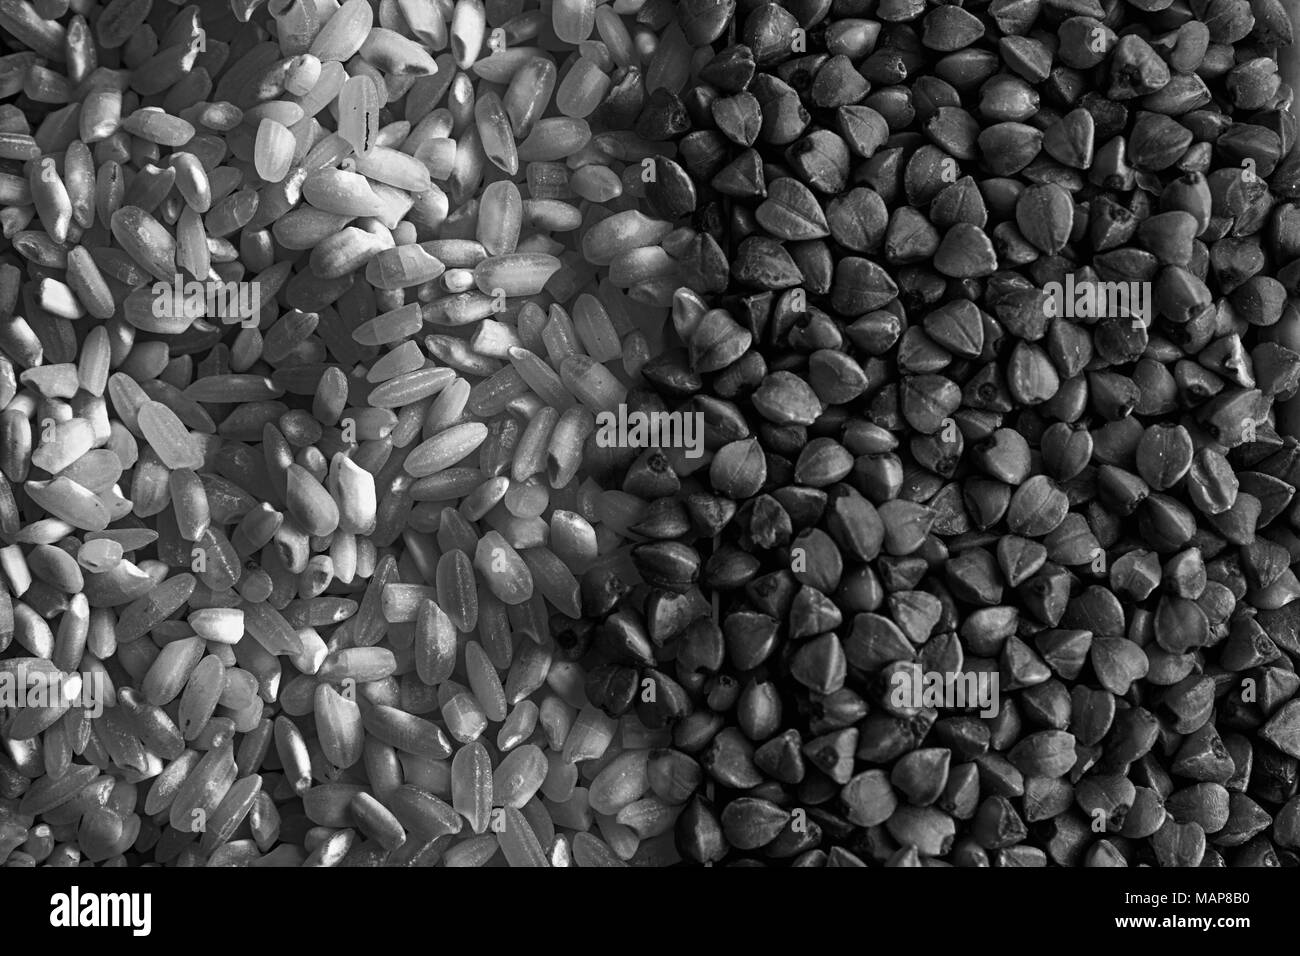 Monochrome Rice and buckwheat grain texture, The concept of proper nutrition and healthy lifestyle. Top view, close-up as background or texture. Stock Photo